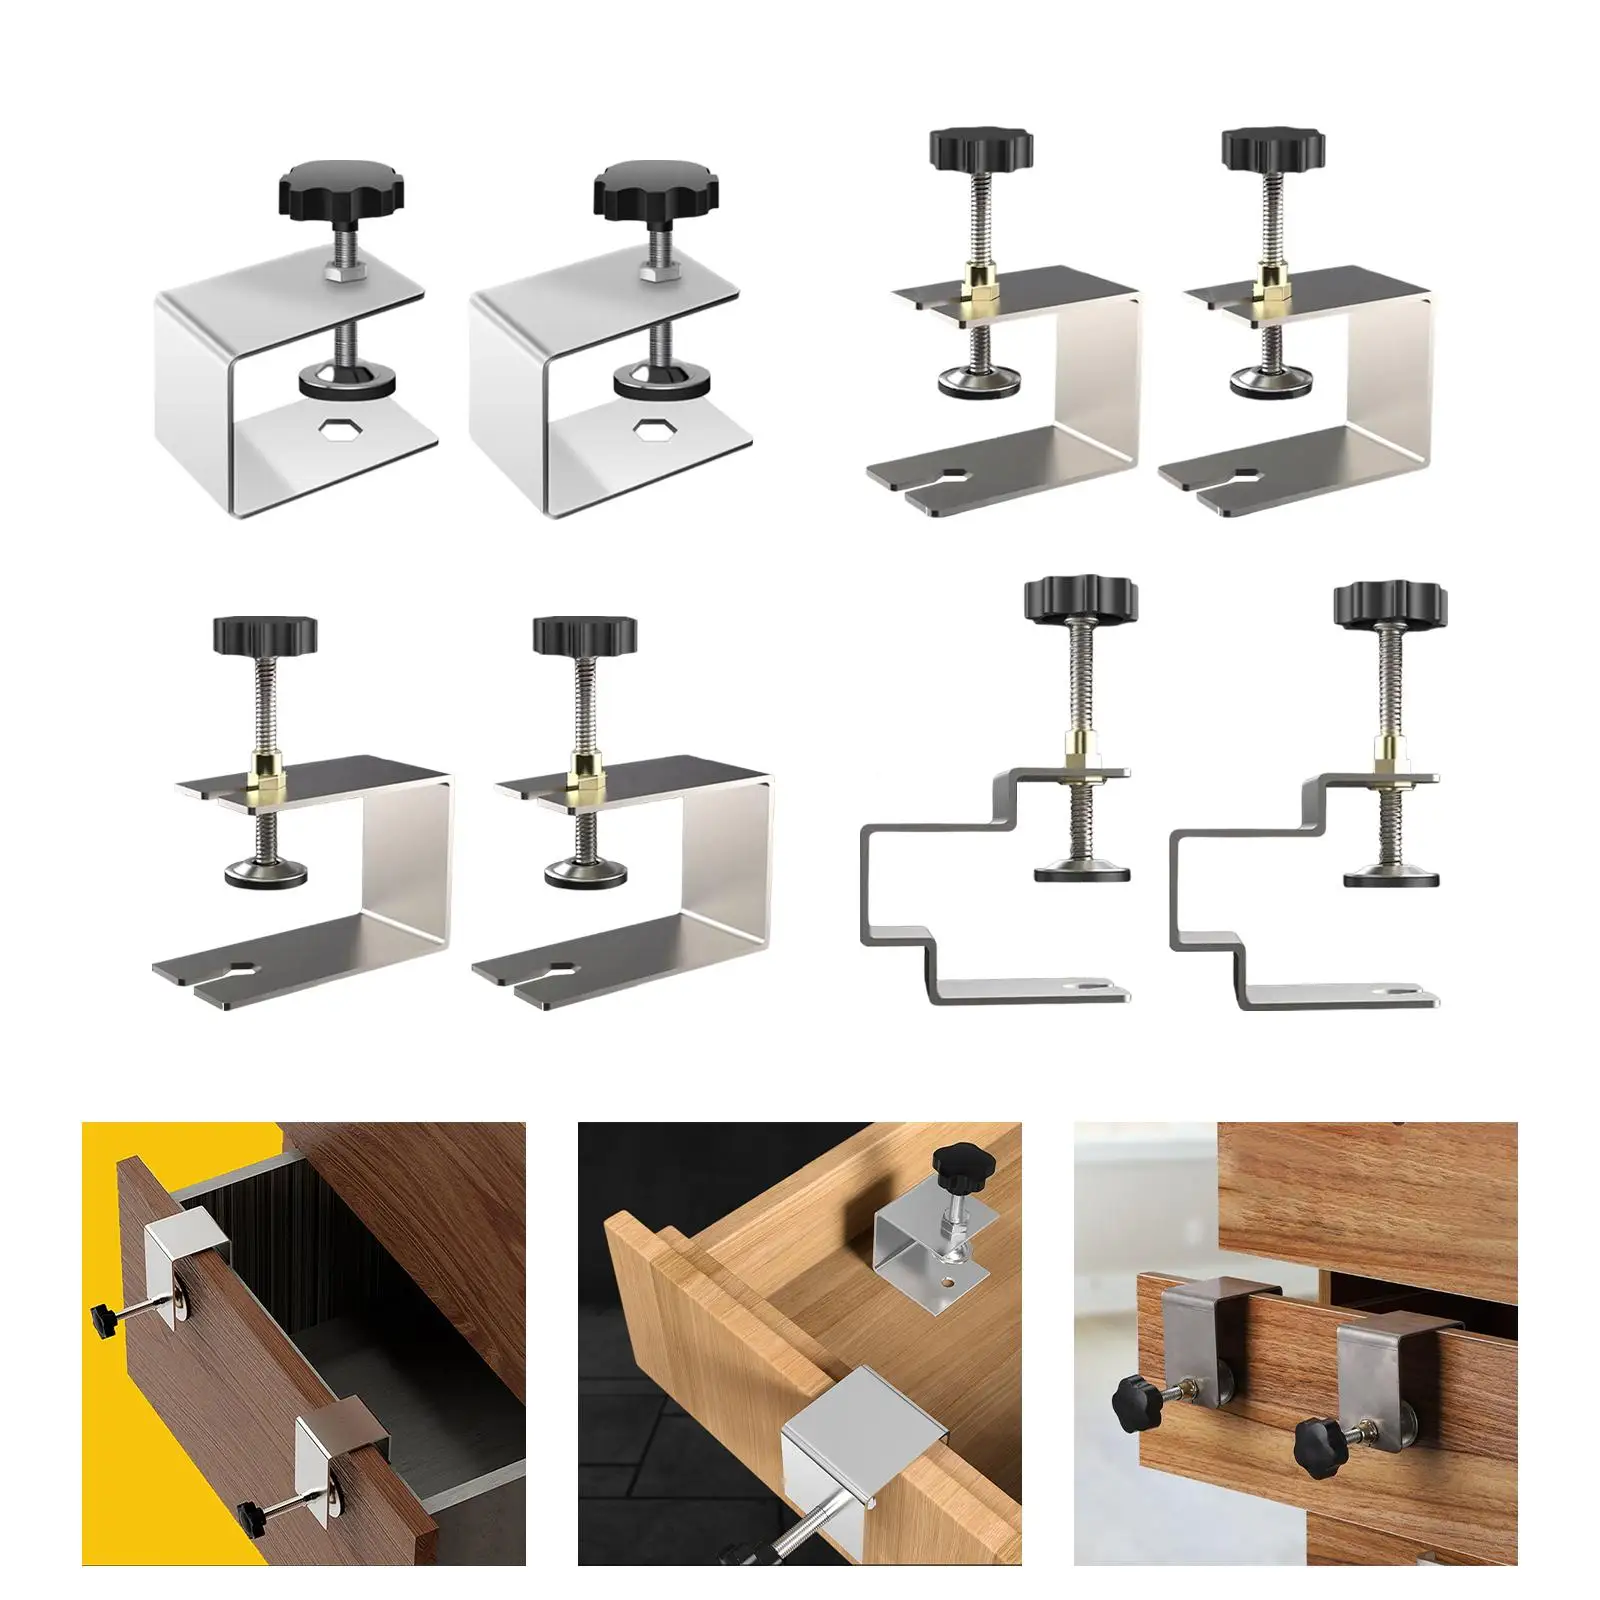 2x Portable Woodworking Clamp Drawer Front Installation Clamps Fixing Clip Adjustment Fasten Stable Smooth Hardware